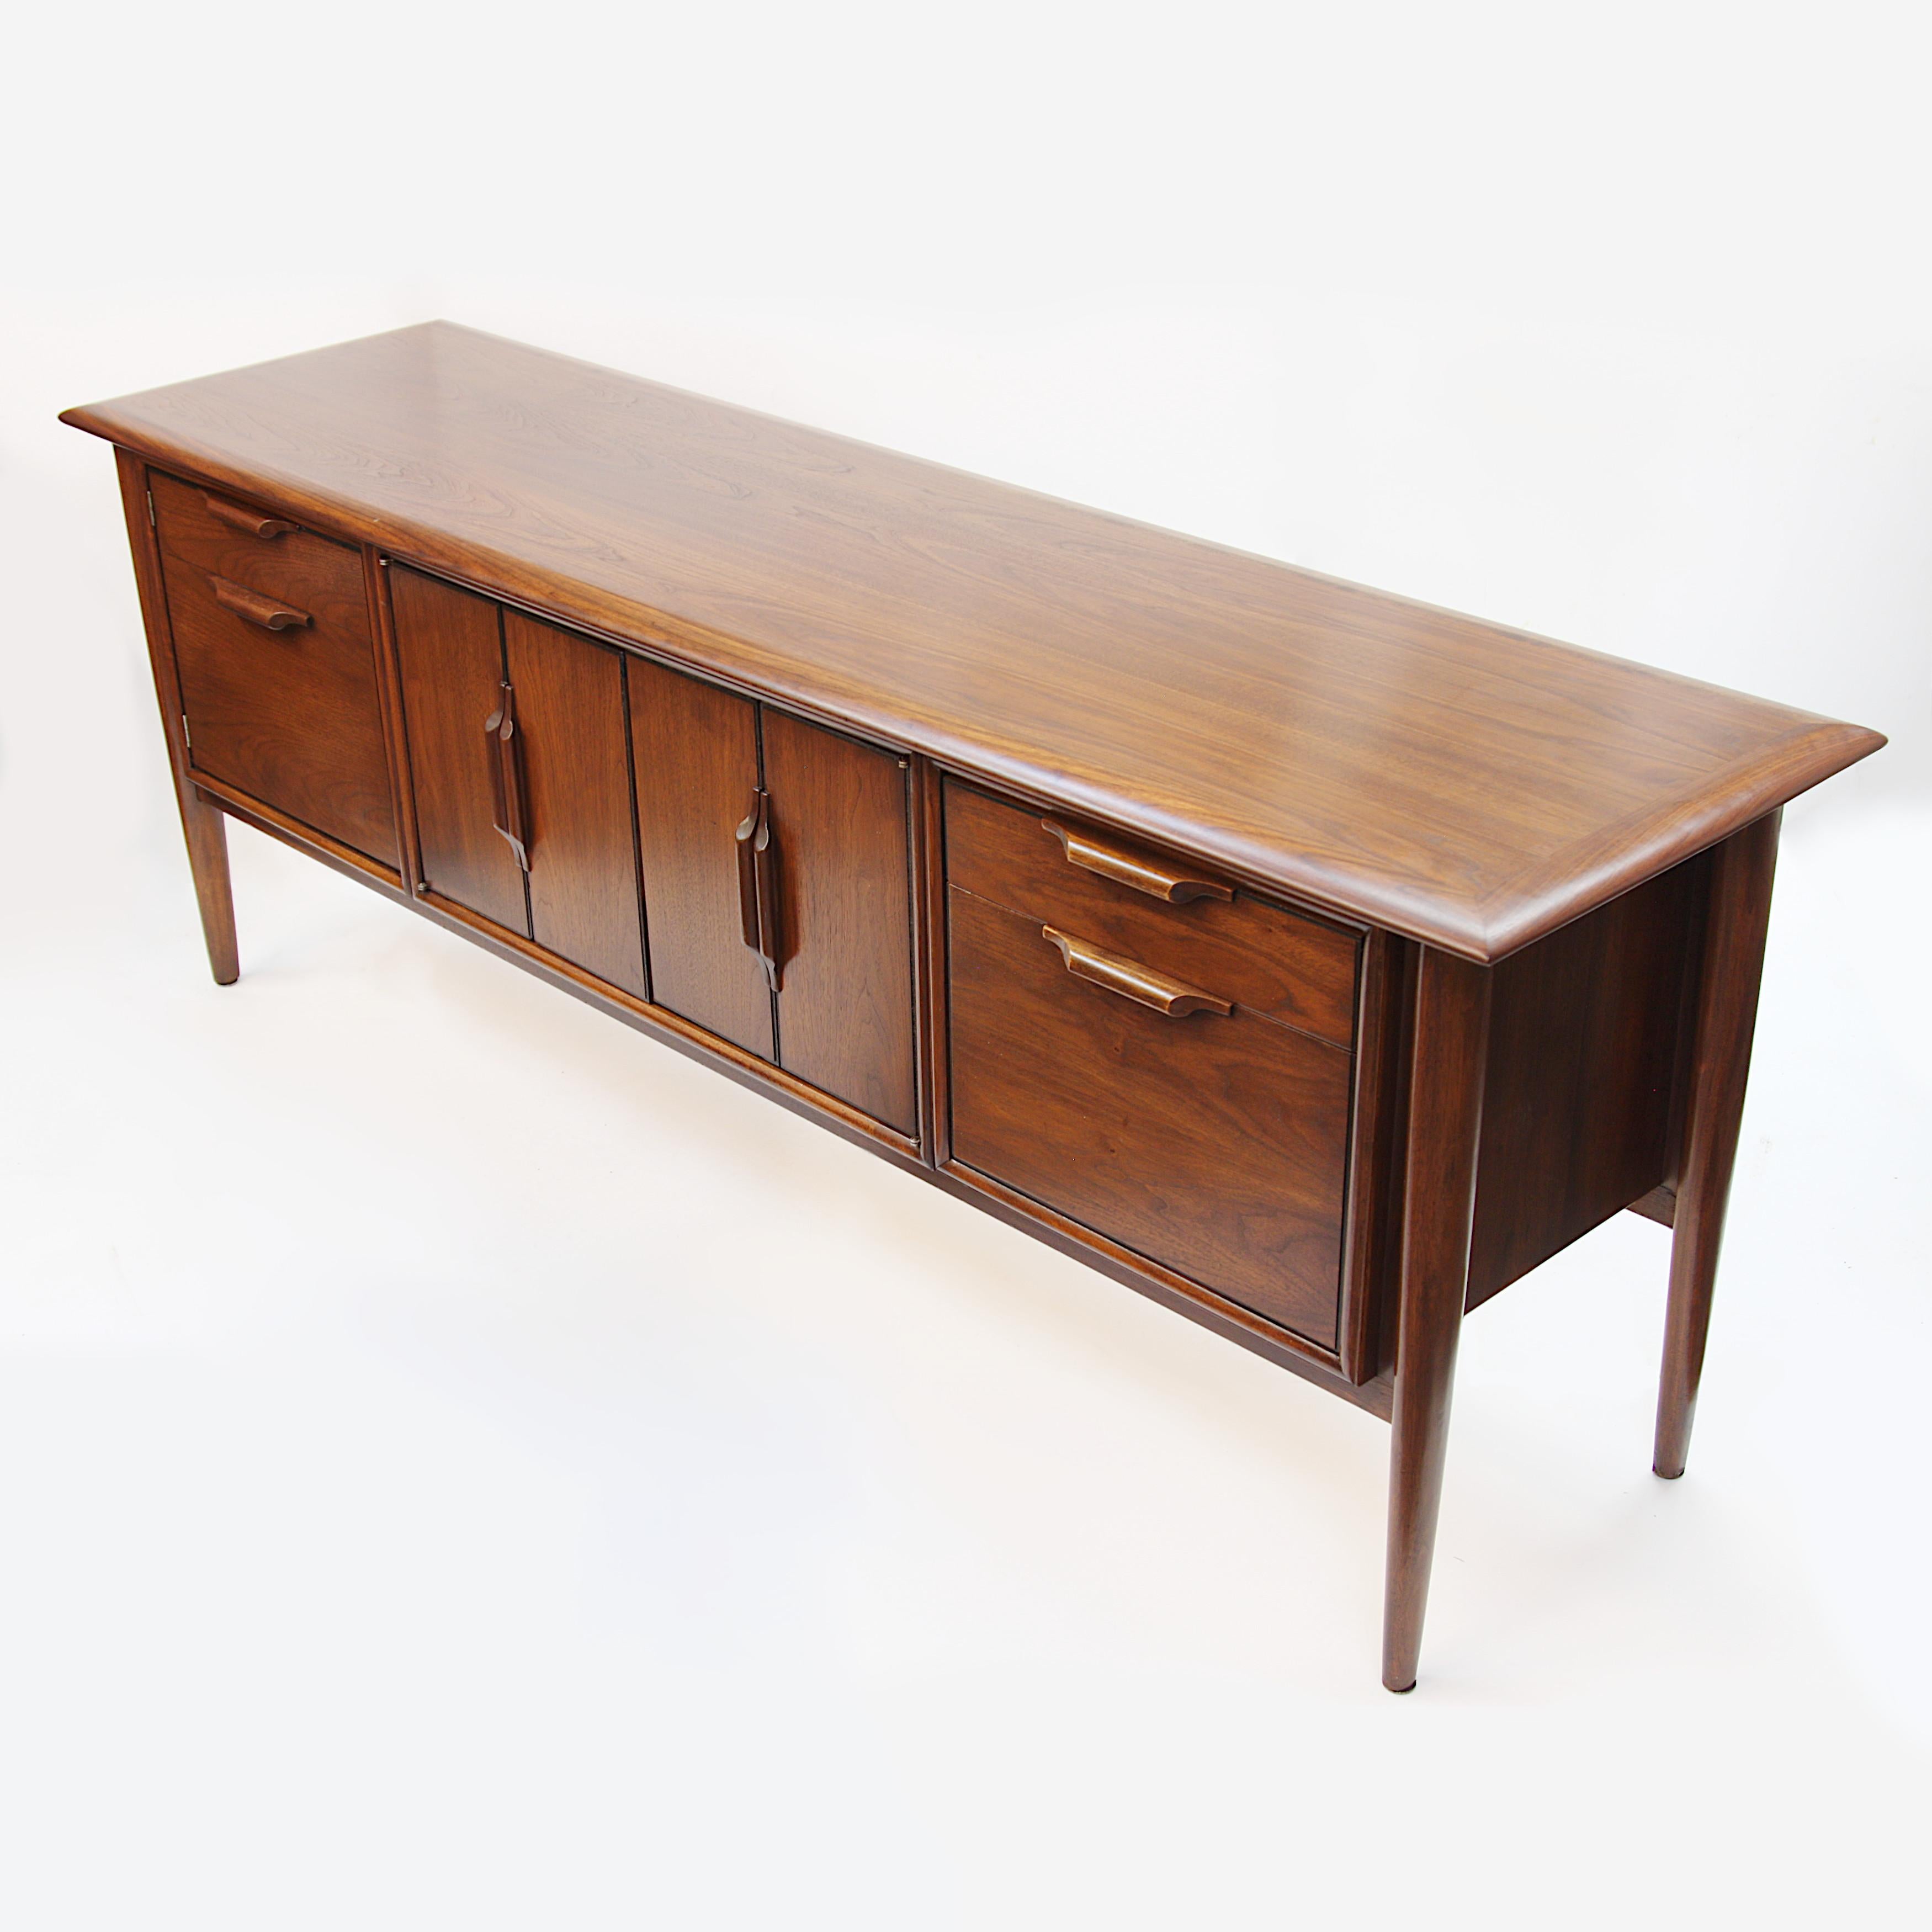 Stunning Mid-Century Modern credenza made in Highpoint, North Carolina by the Alma Desk Company. Part of Alma’s “Castilian” line. Credenza features center accordion doors, file drawer, pull-out shelf, gorgeous, floating legs and thick, rounded-edge